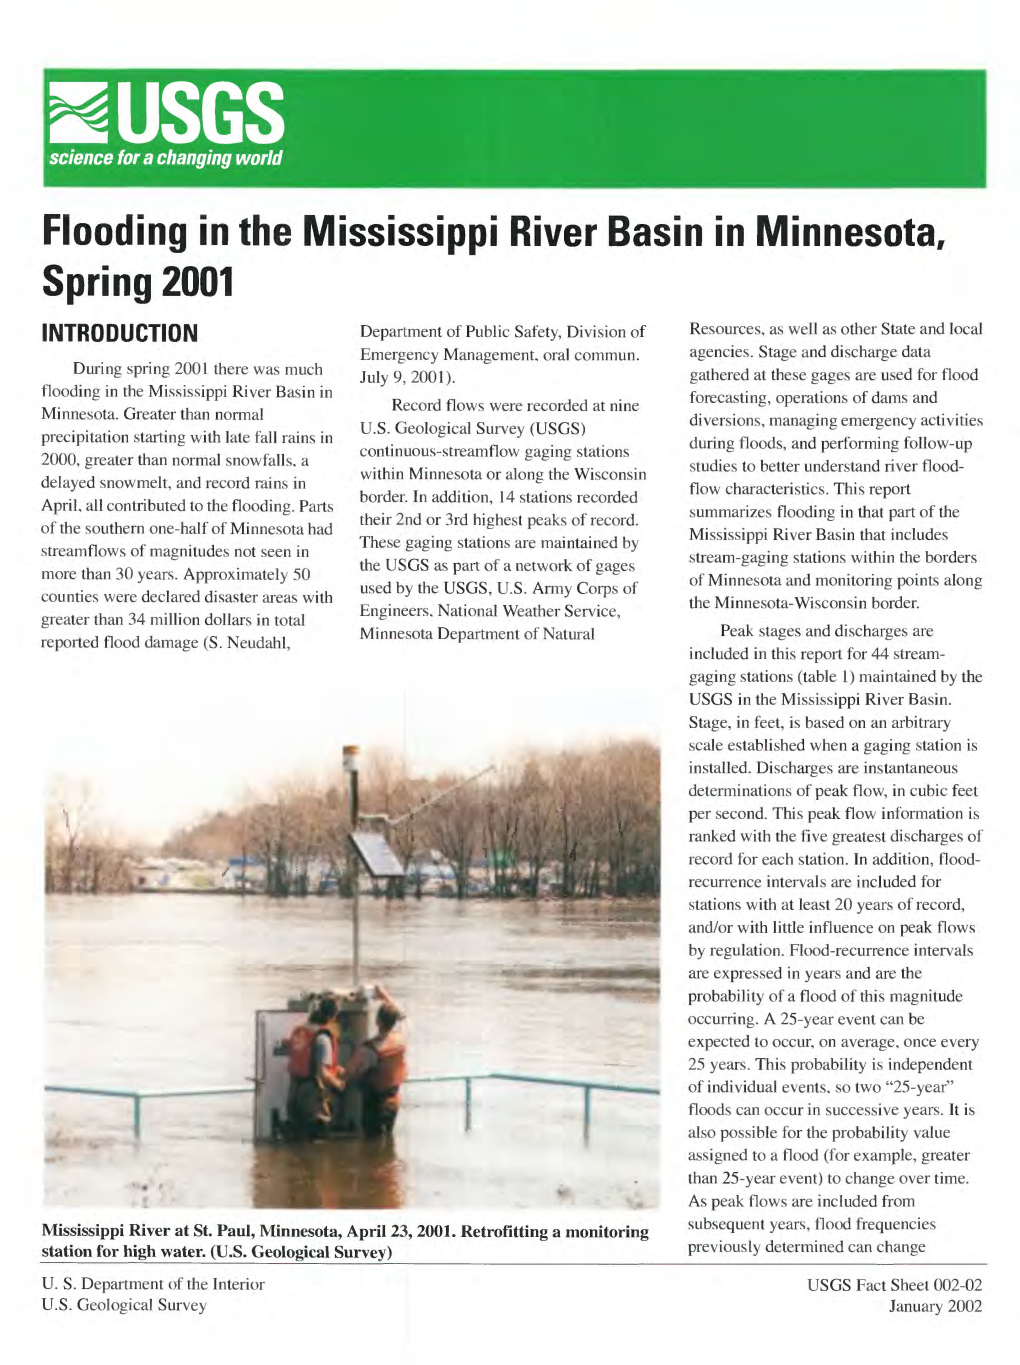 Flooding in the Mississippi River Basin in Minnesota, Spring 2001